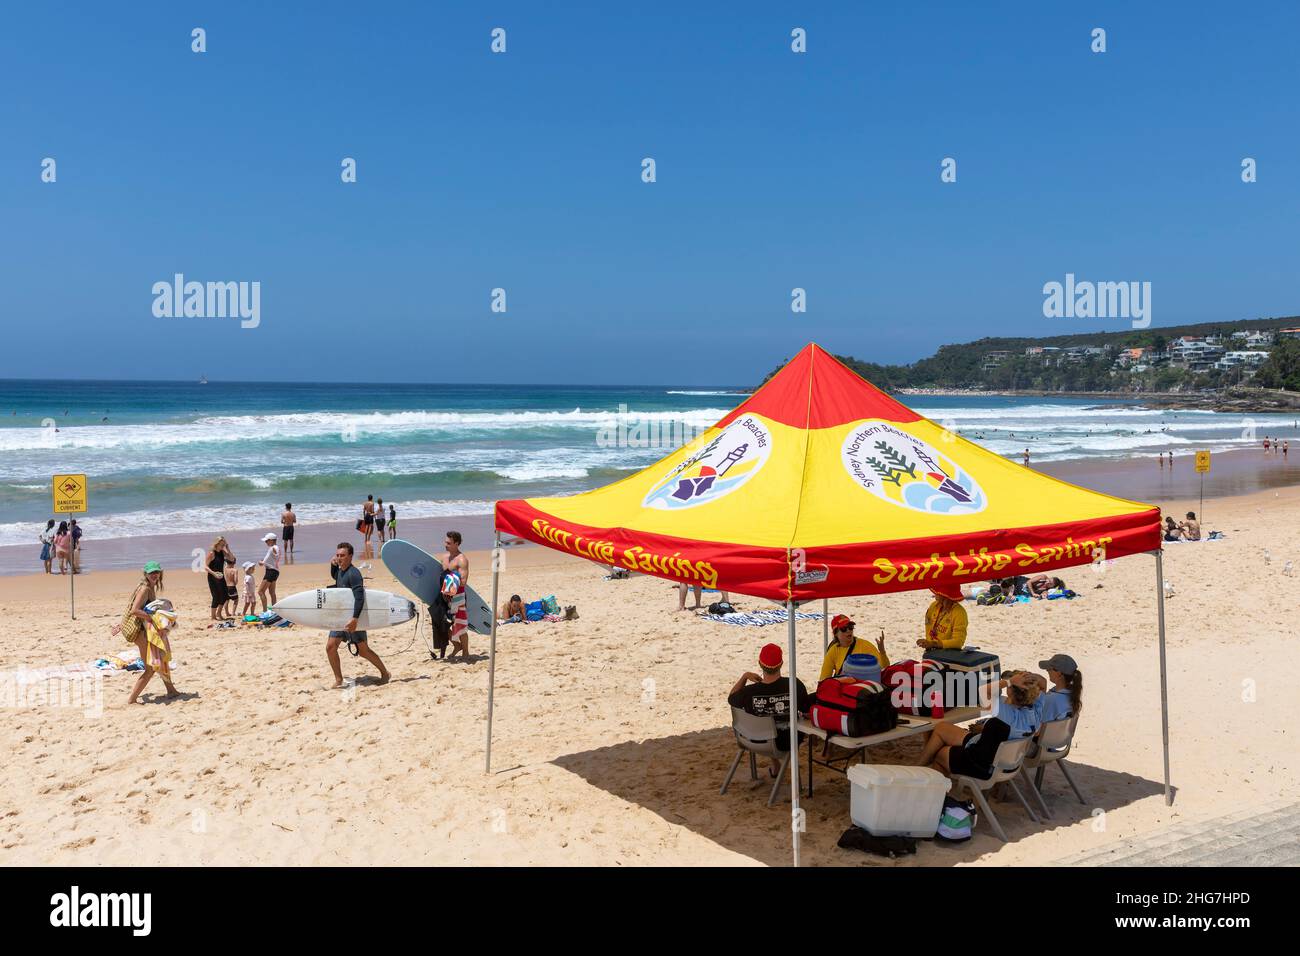 Surf life saving team of volunteers and council lifeguards on Manly Beach Sydney in summer and taking shade under the tent,Sydney,Australia Stock Photo